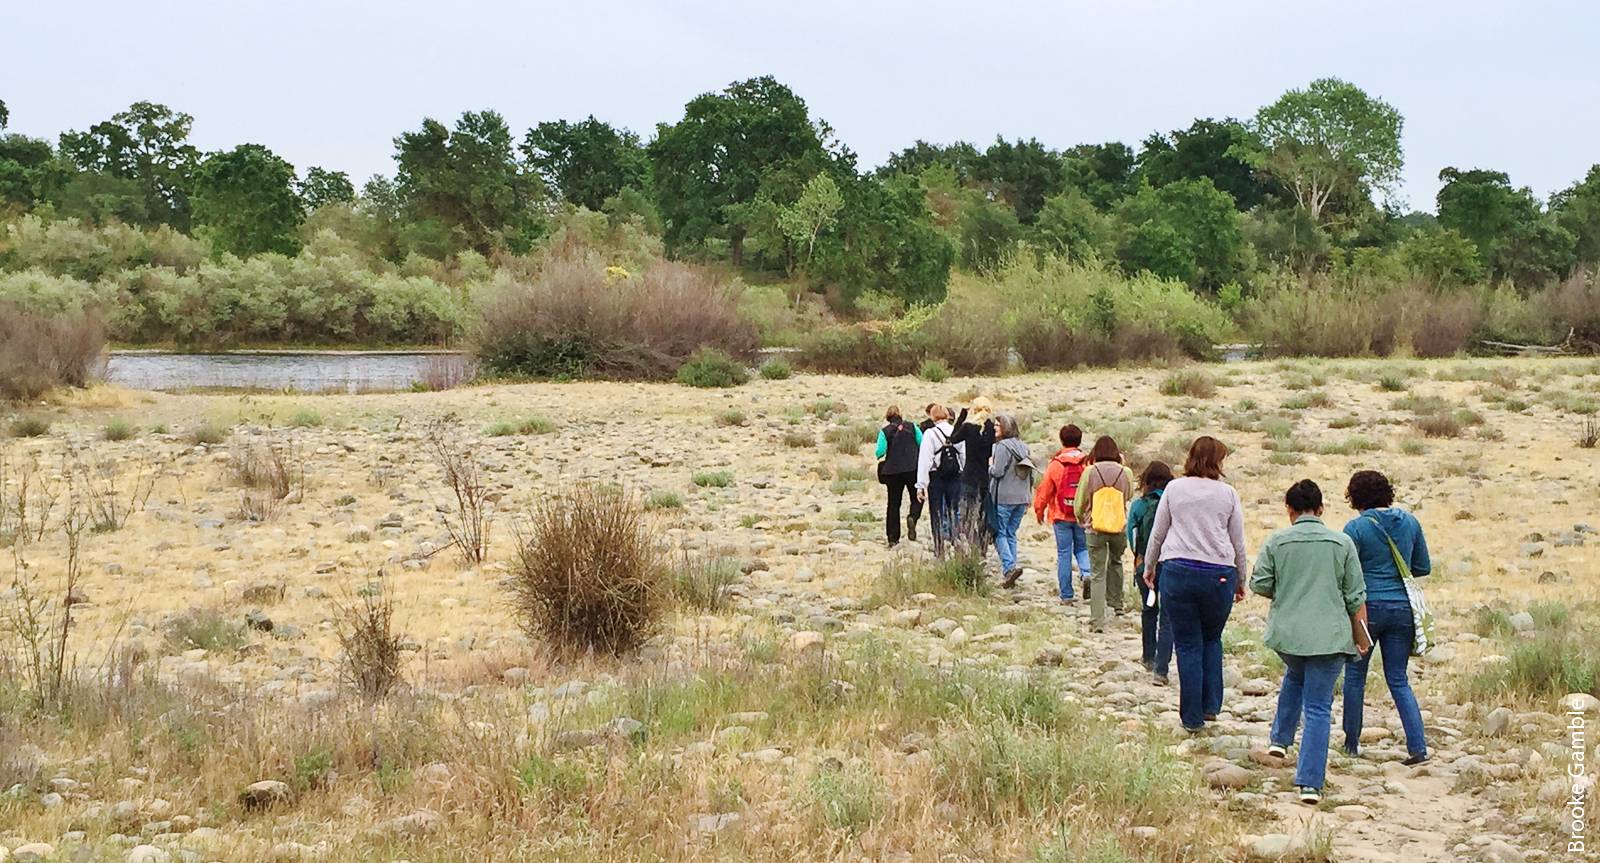 Above, California Naturalists learn about the plants and animals of the American River Parkway at the Effie Yeaw Nature Center near Sacramento.